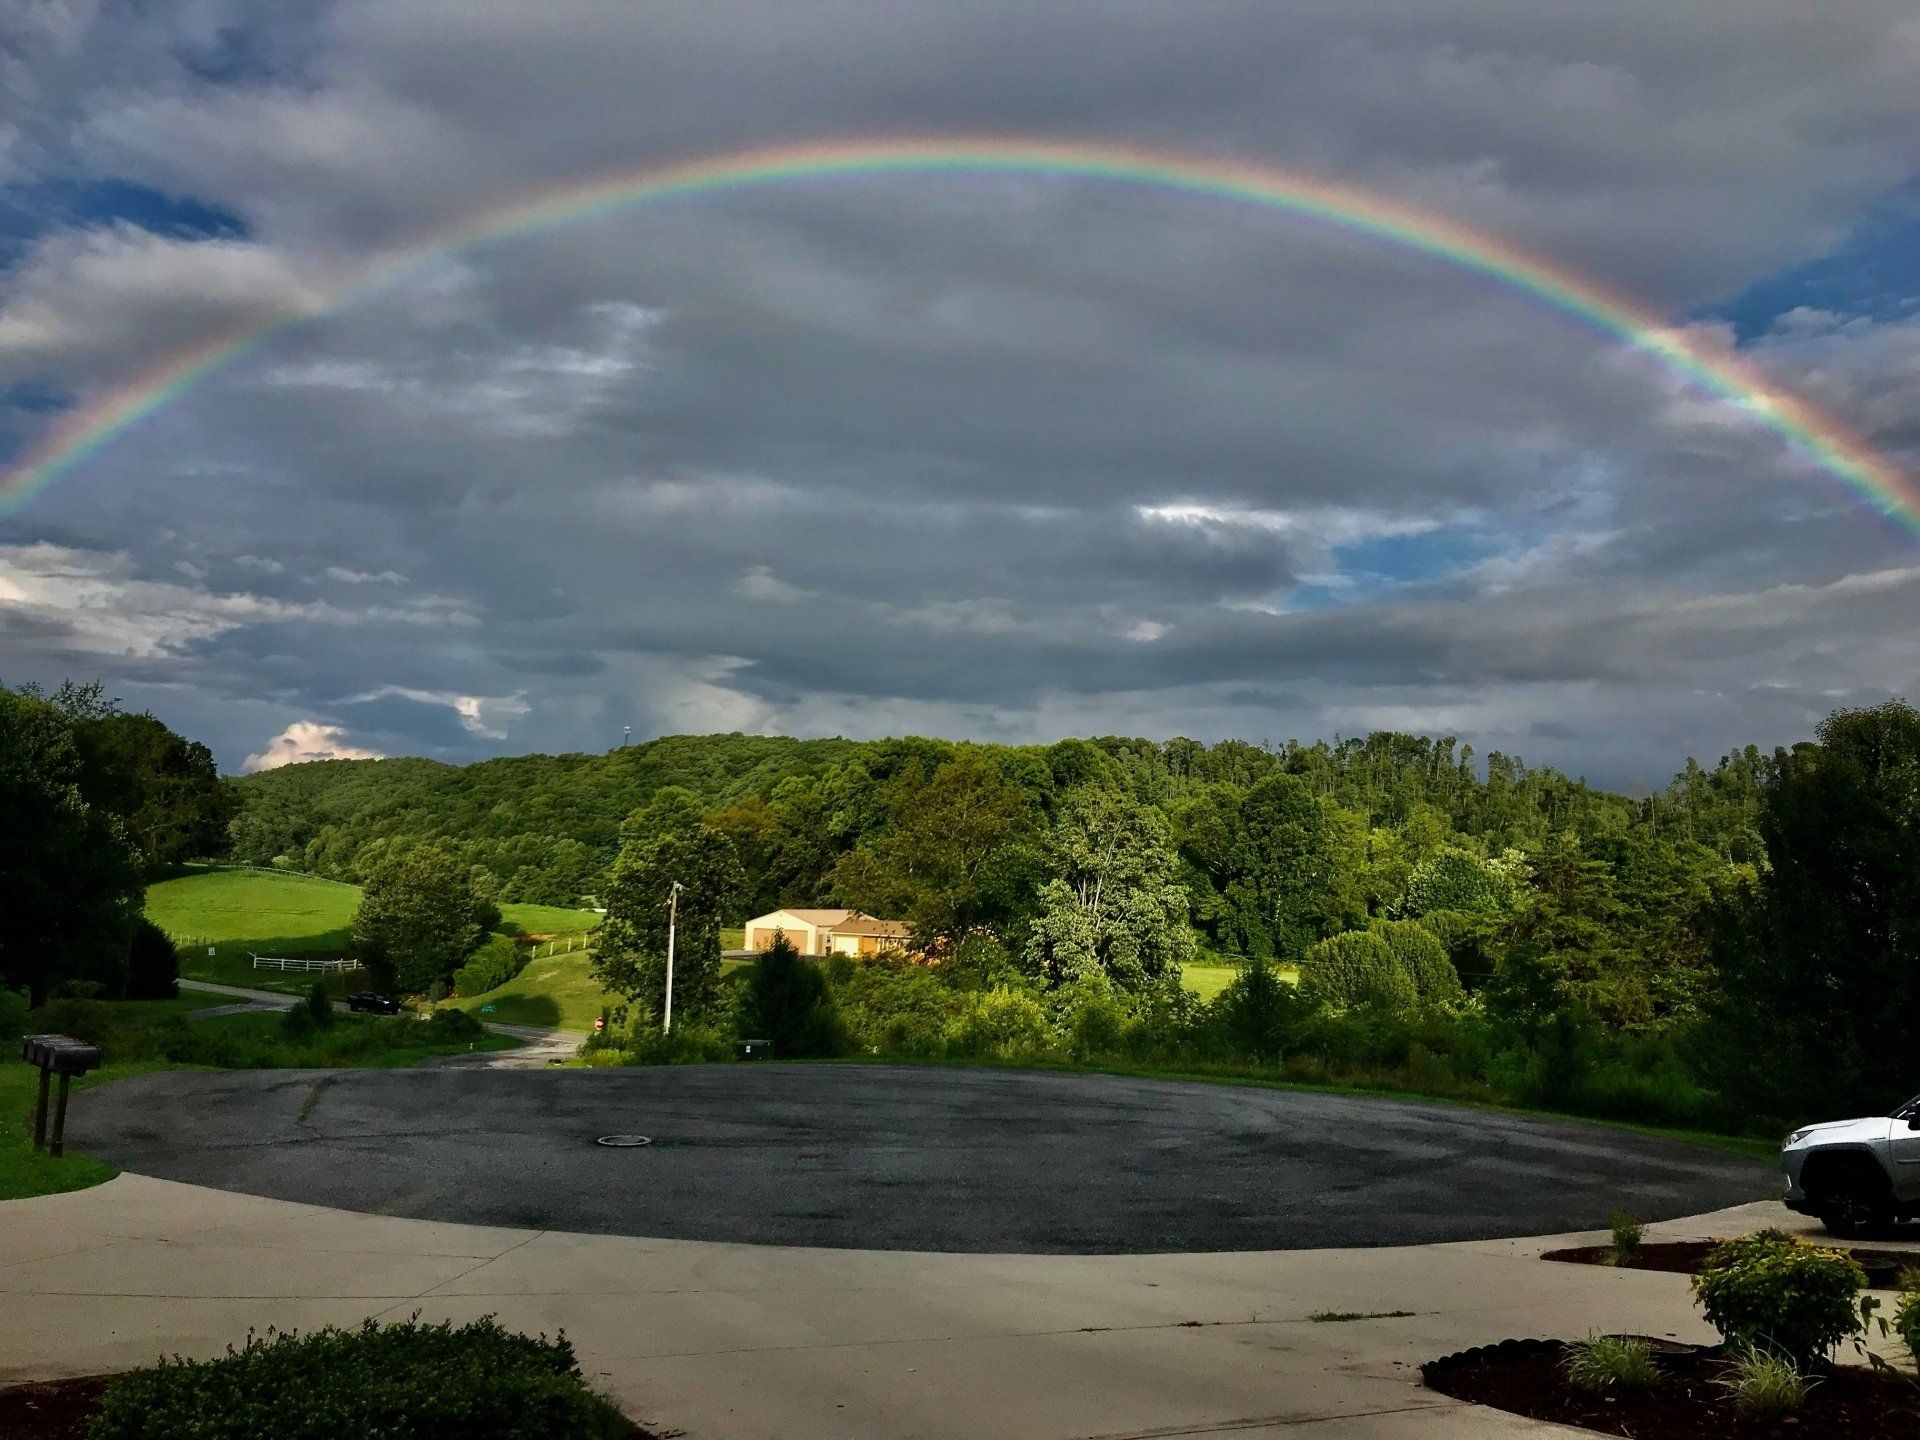 153 Monument Ridge Bristol, TN 37620 Front Porch View of the Holston Mountains with a rainbow overarching